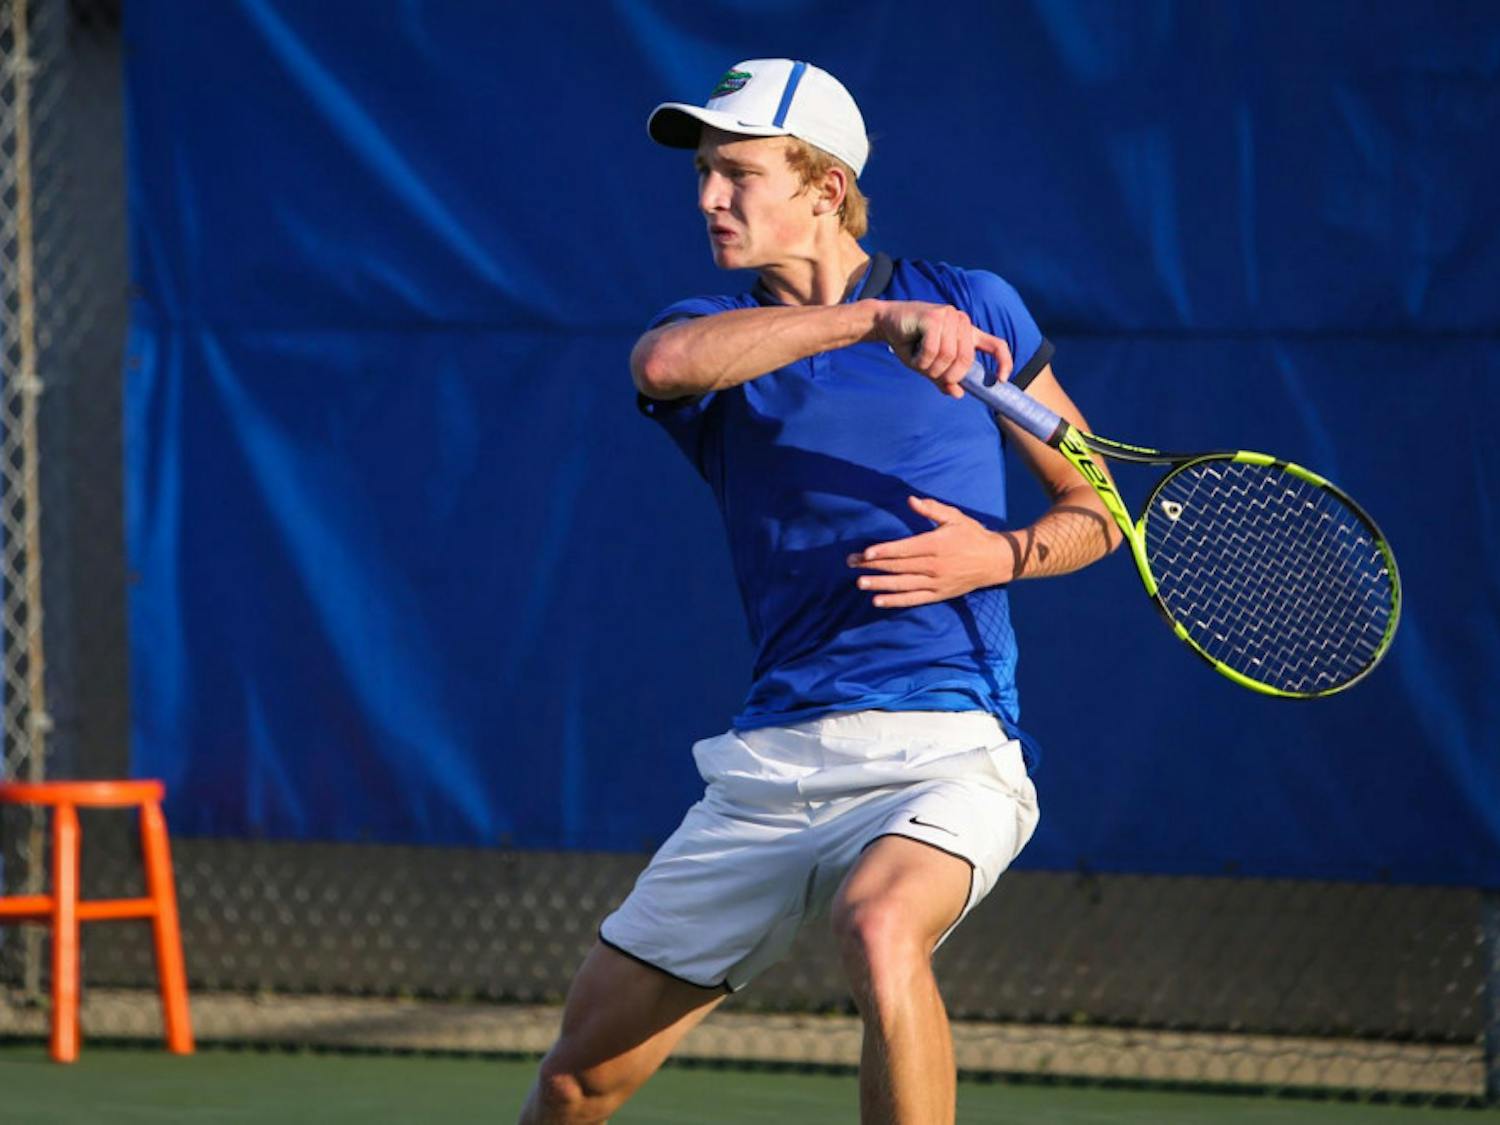 The Gators men's tennis team earned a Final Four bid after defeated Baylor on Thursday.